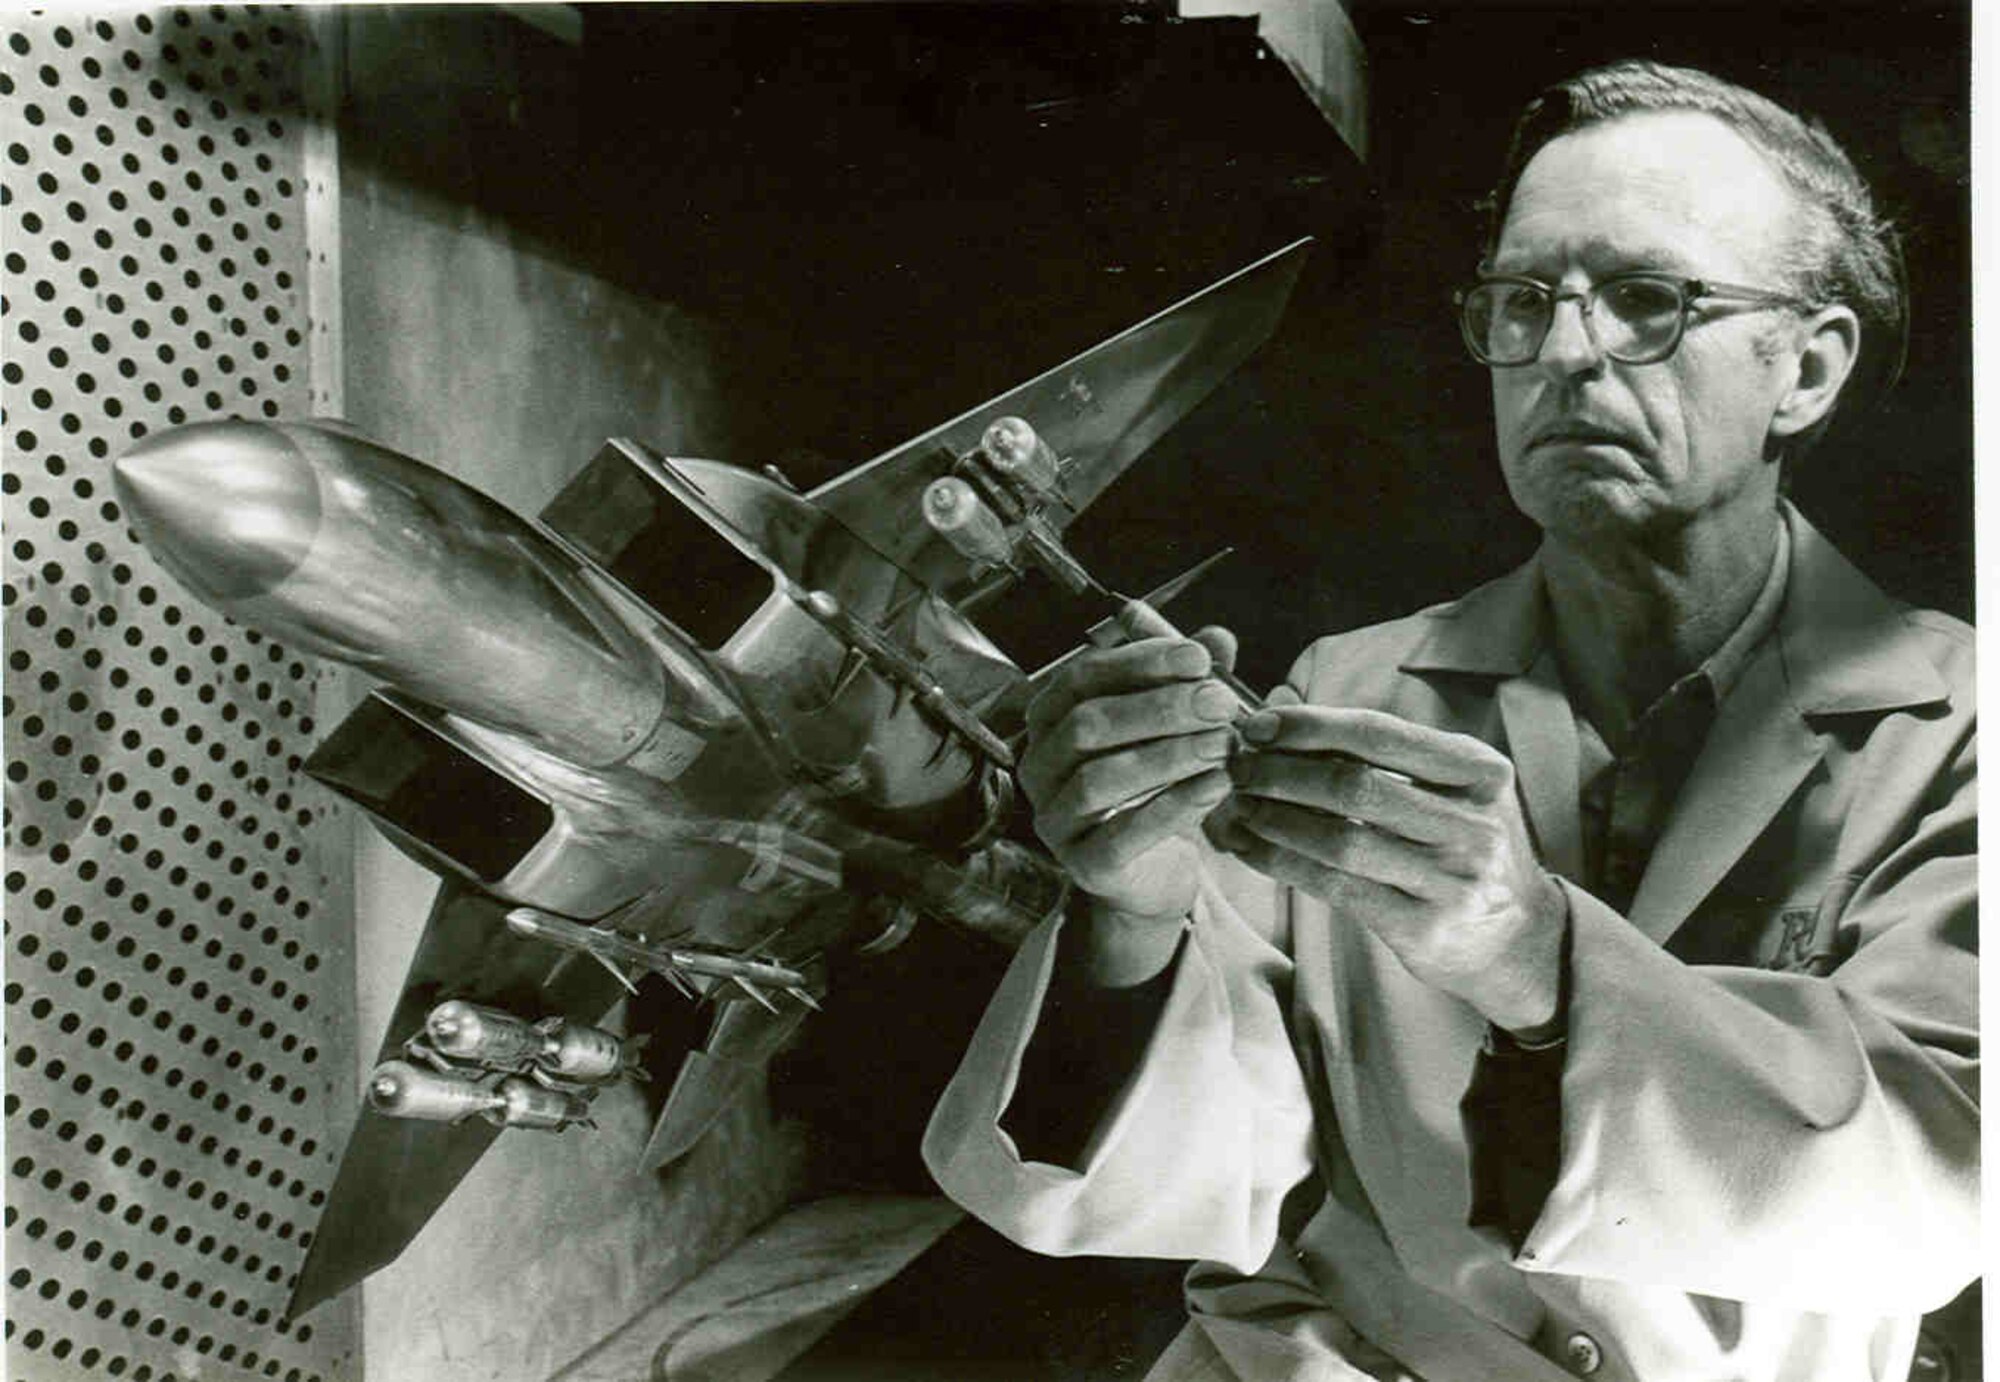 Test facility craftsman Jack Culpepper adjusts a model of the F-15 Eagle before it undergoes aerodynamic testing in the mid-1970s in the 4-foot transonic wind tunnel at Arnold Air Force Base, Tennessee, headquarters of Arnold Engineering Development Complex. The Air Force recently celebrated the 50th anniversary of the F-15’s deployment. Models of the aircraft, engines and other F-15 components have frequently been tested by AEDC over the past 50 years. (U.S. Air Force photo)